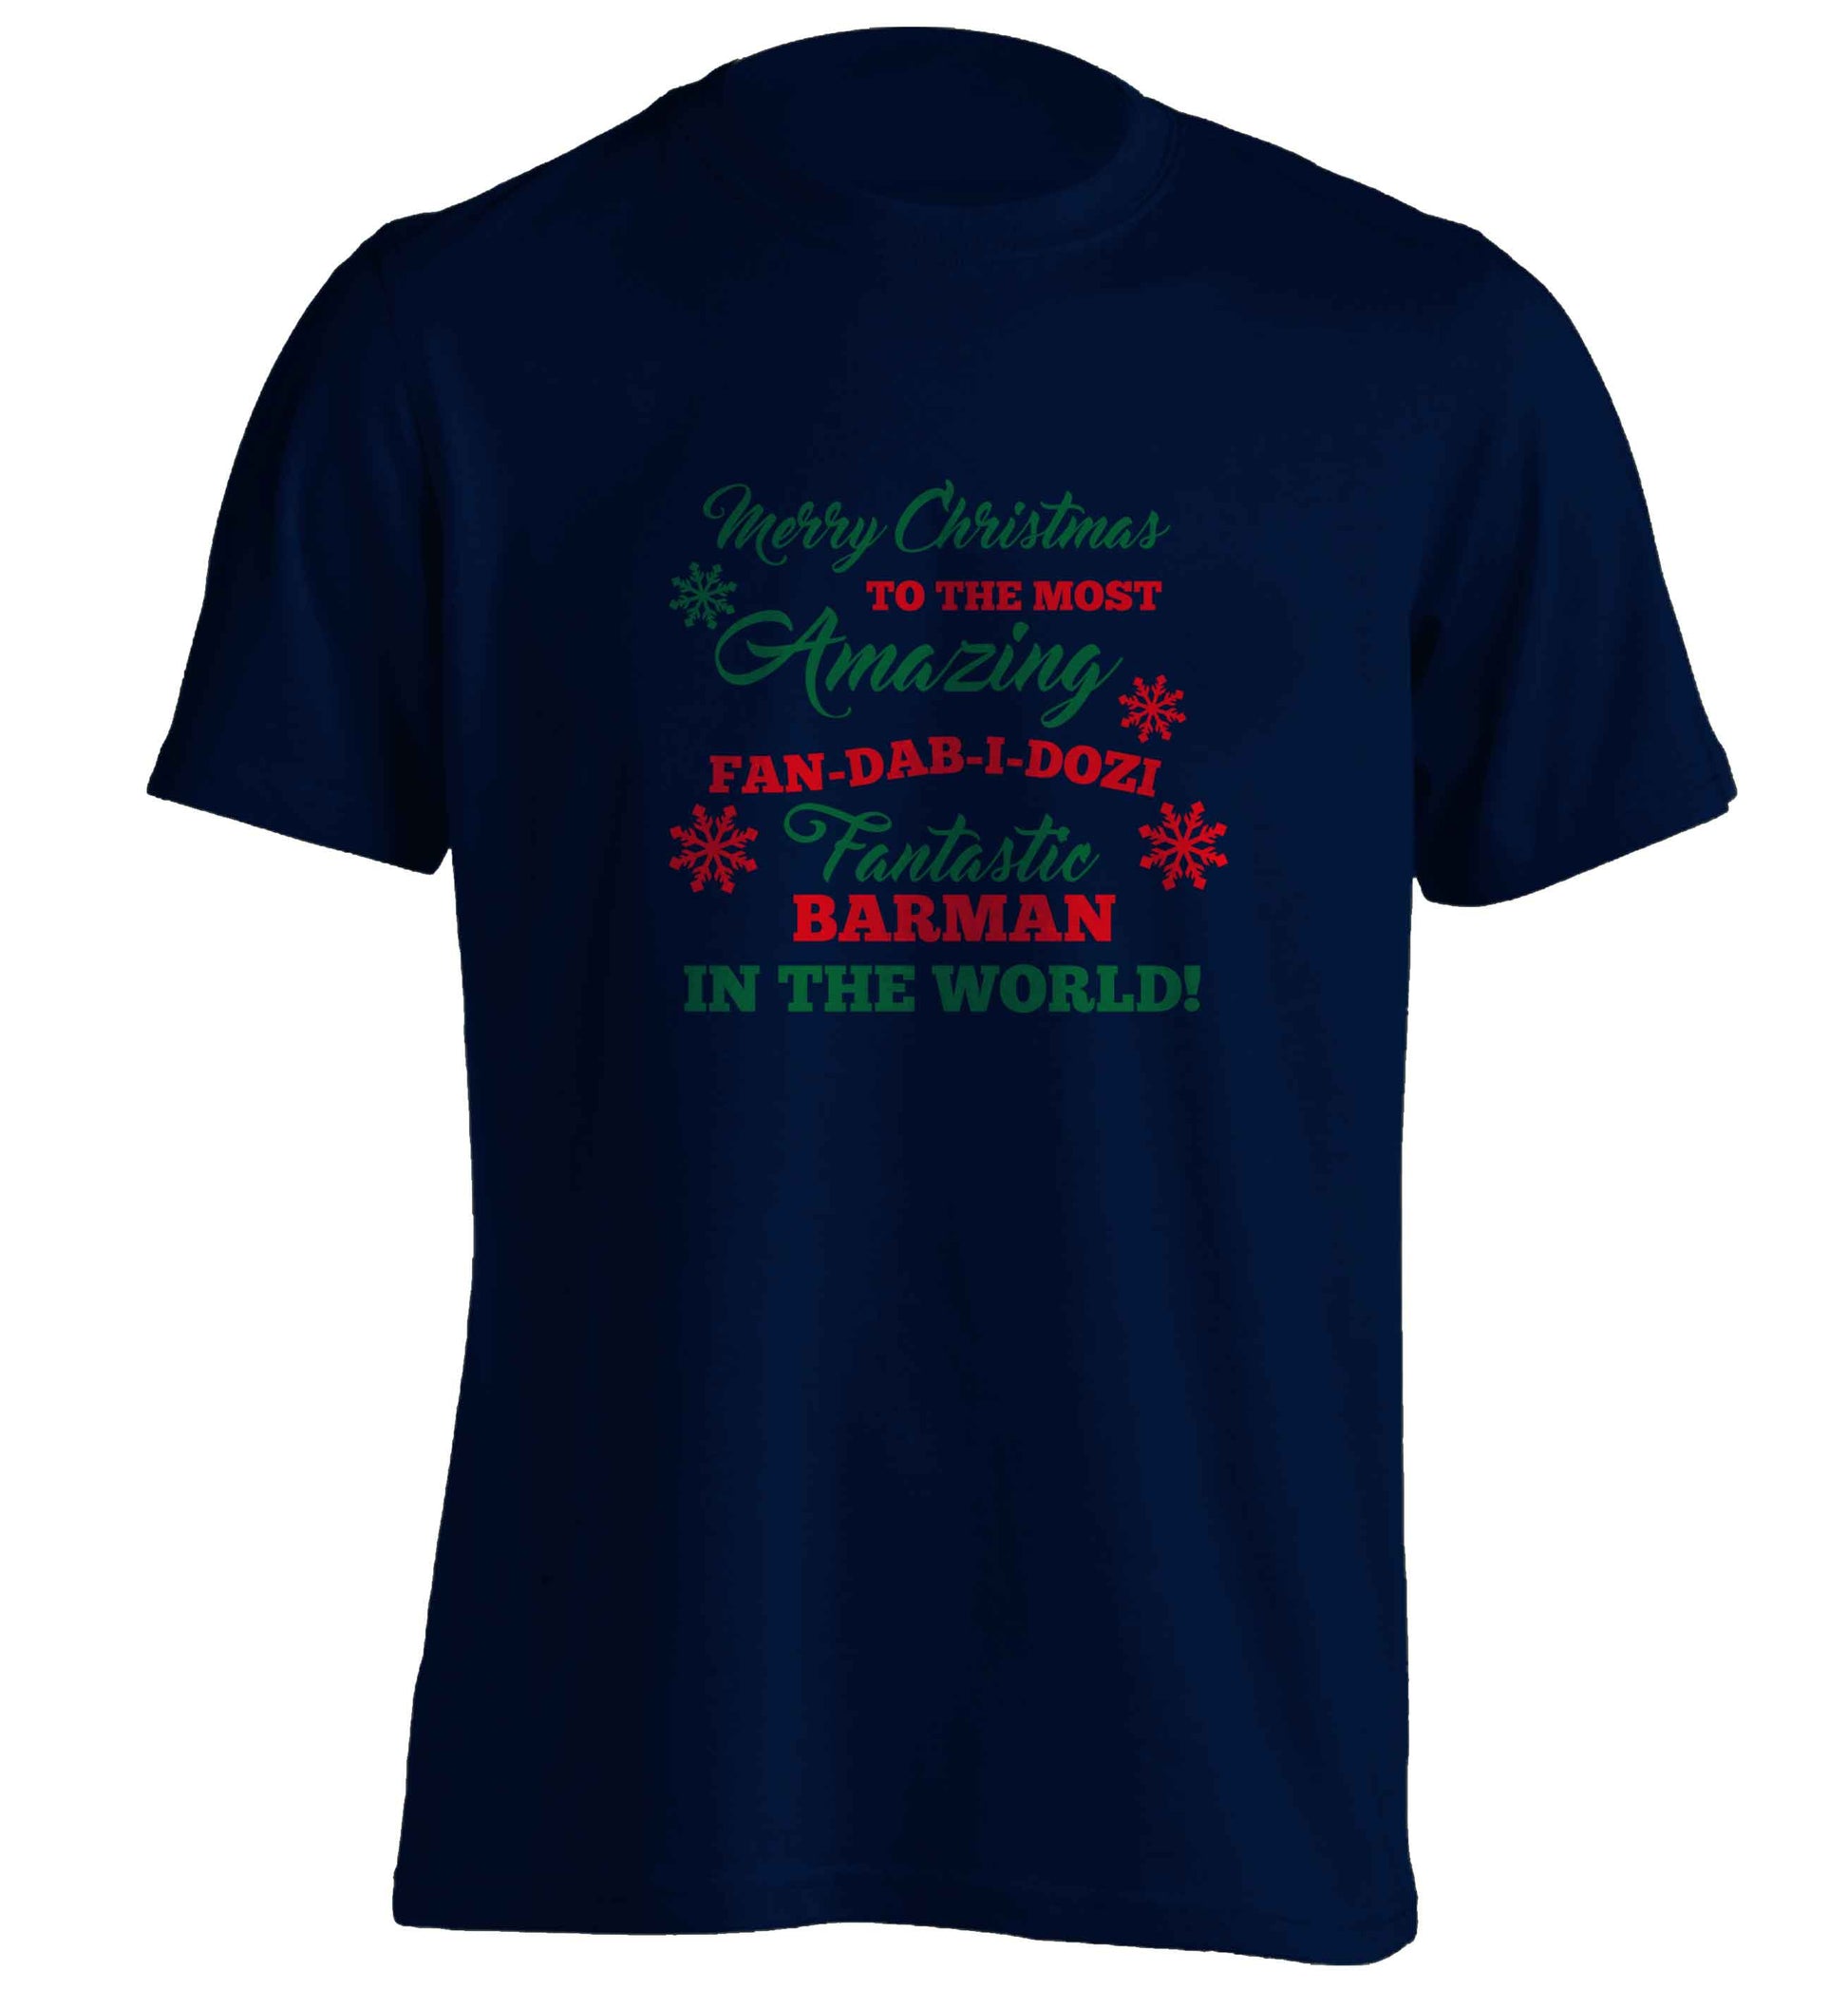 Merry Christmas to the most amazing barman in the world! adults unisex navy Tshirt 2XL